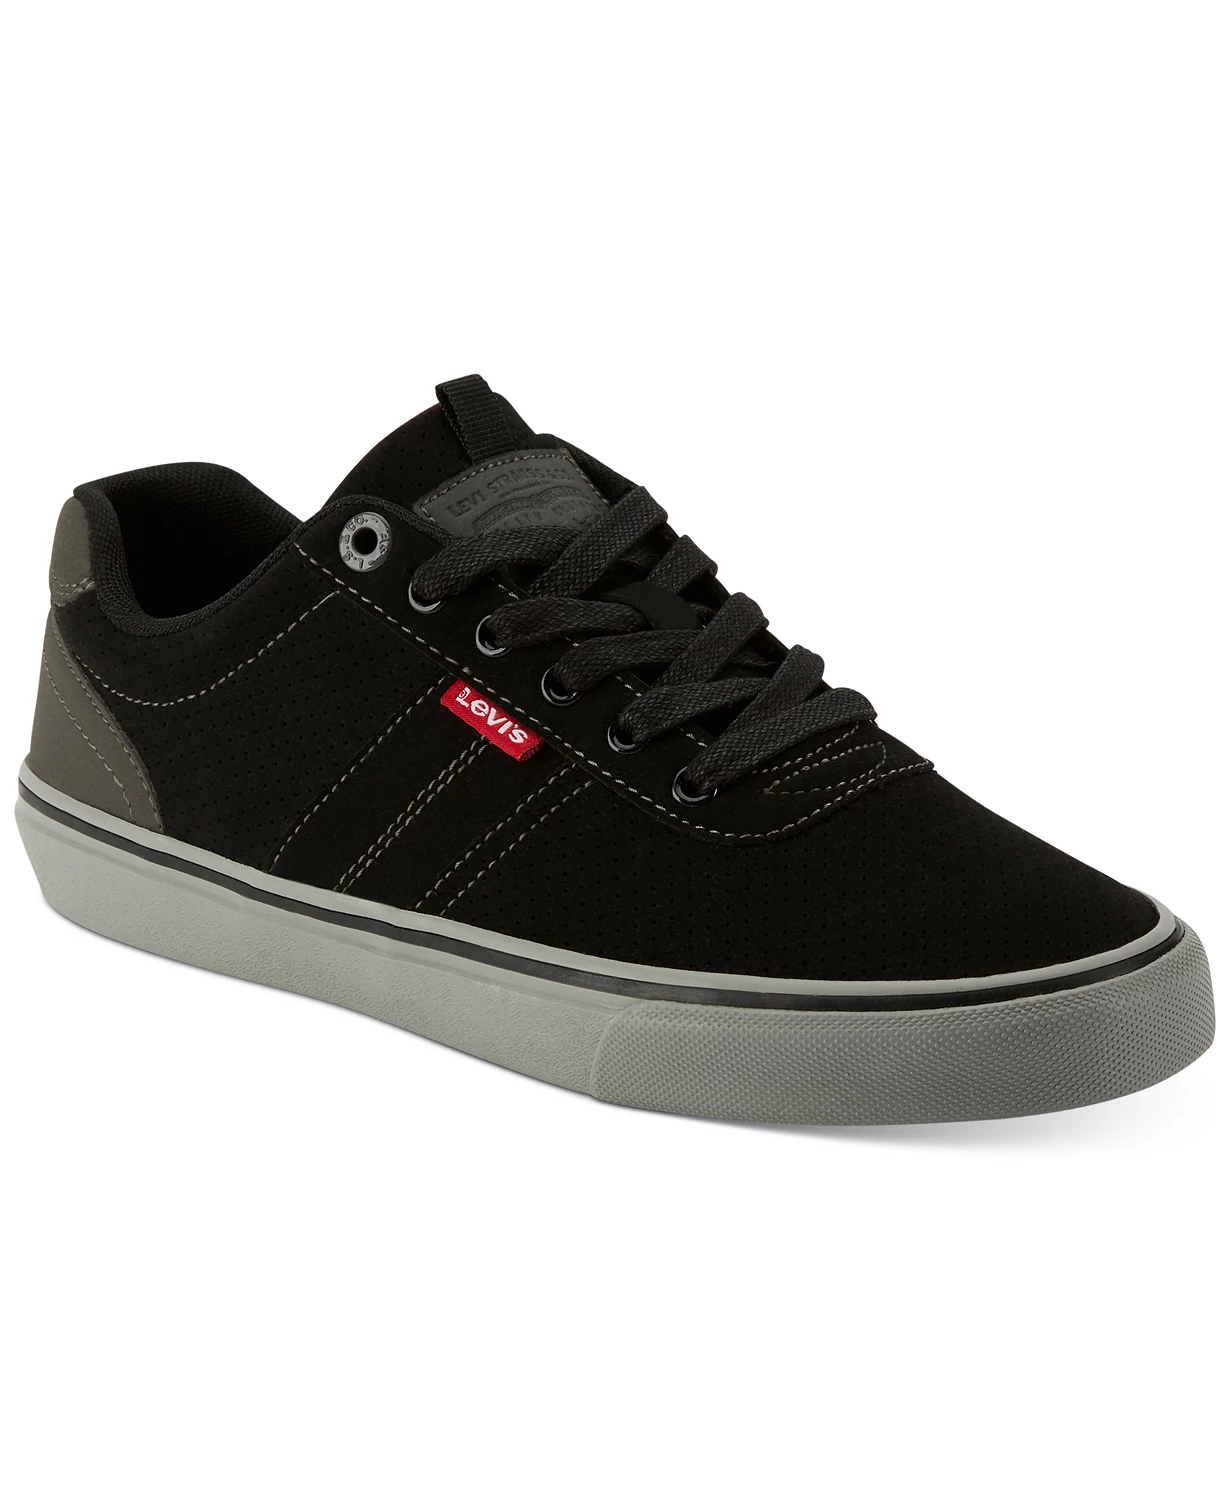 Levi’s Men’s Miles Perforated Classic Fashion Sneakers $19.99